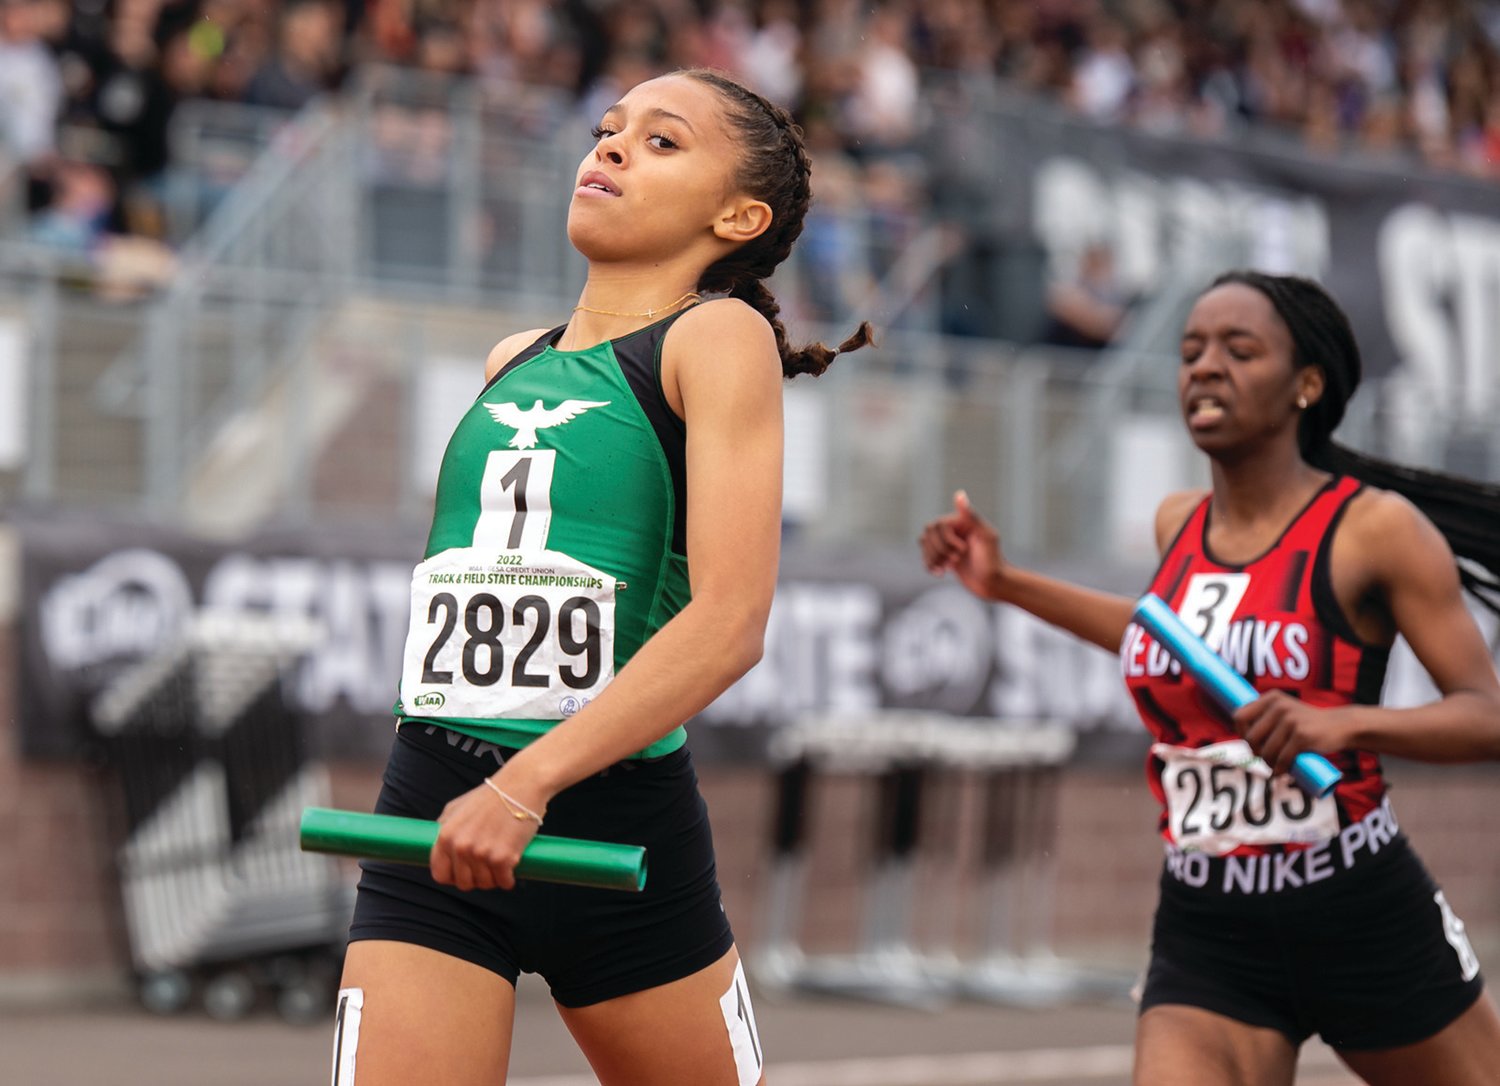 Tumwater's Ava Jones reacts as she crosses the finish line first as the anchor leg in the 2A Girls 4x200 prelim at the 2A/3A/4A State Track and Field Championships on Thursday, May 26, 2022, at Mount Tahoma High School in Tacoma. (Joshua Hart/For The Chronicle)